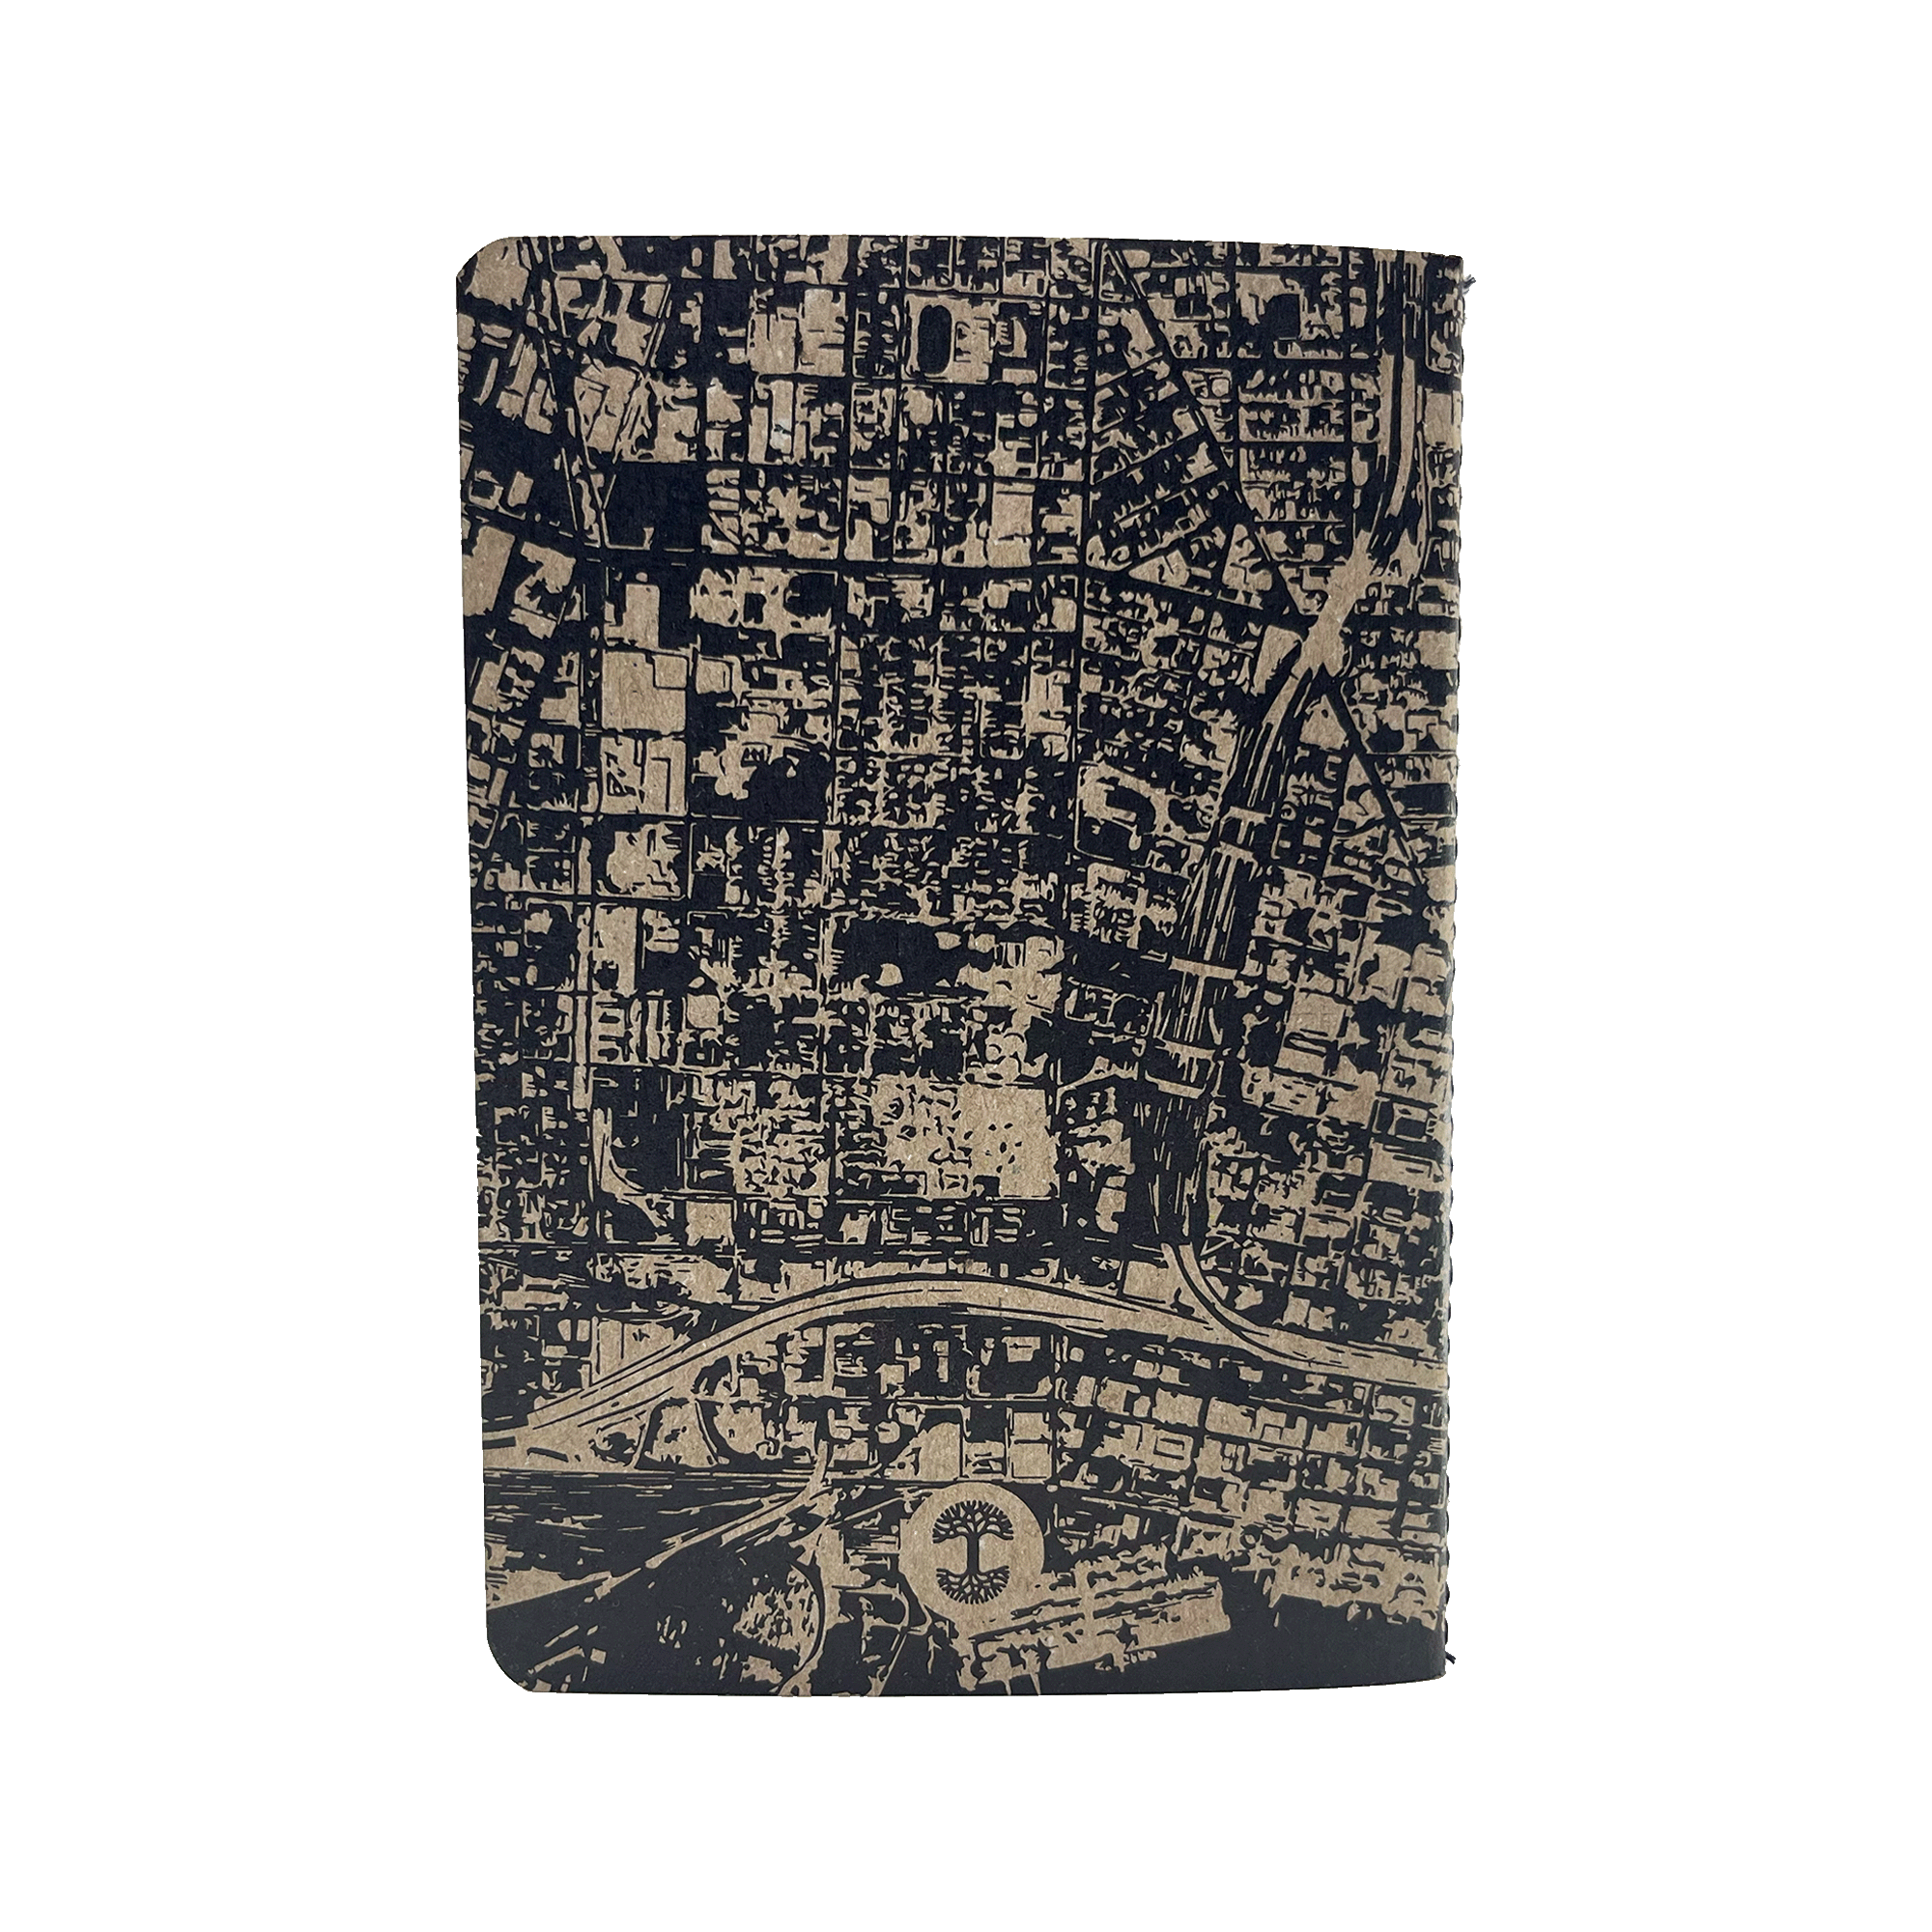 Back view of mini notebook with aerial map view of Oakland and Oaklandish tree logoon cover.